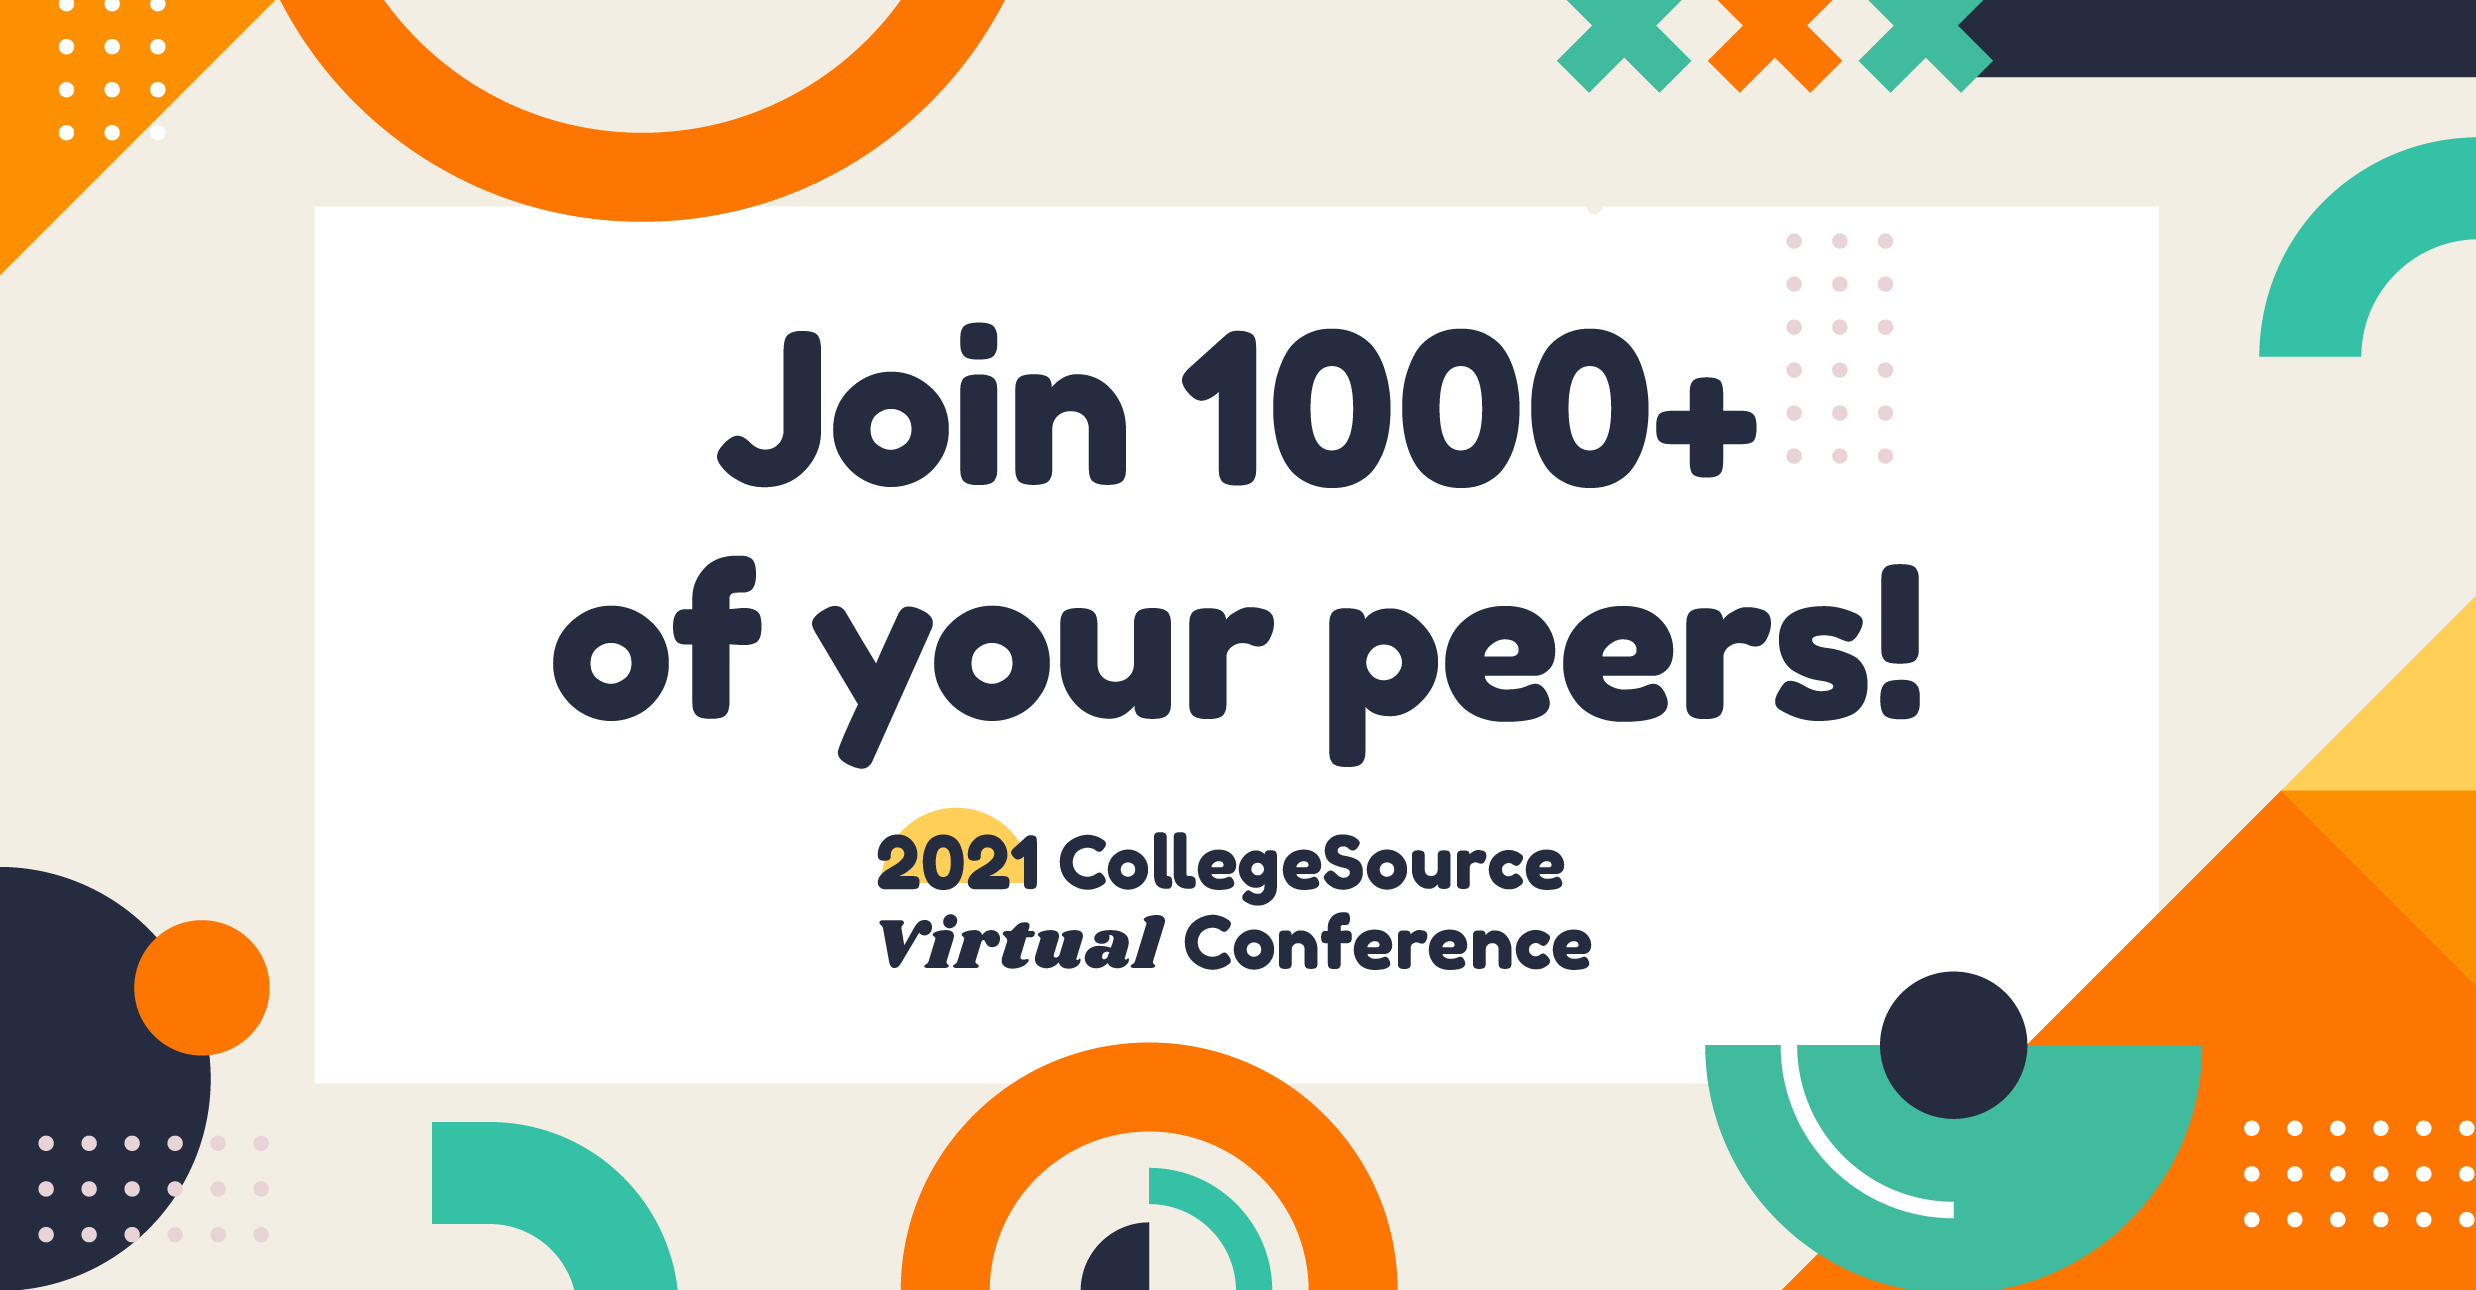 1000-plus-of-your-peers-at-collegesource-virtual-conference